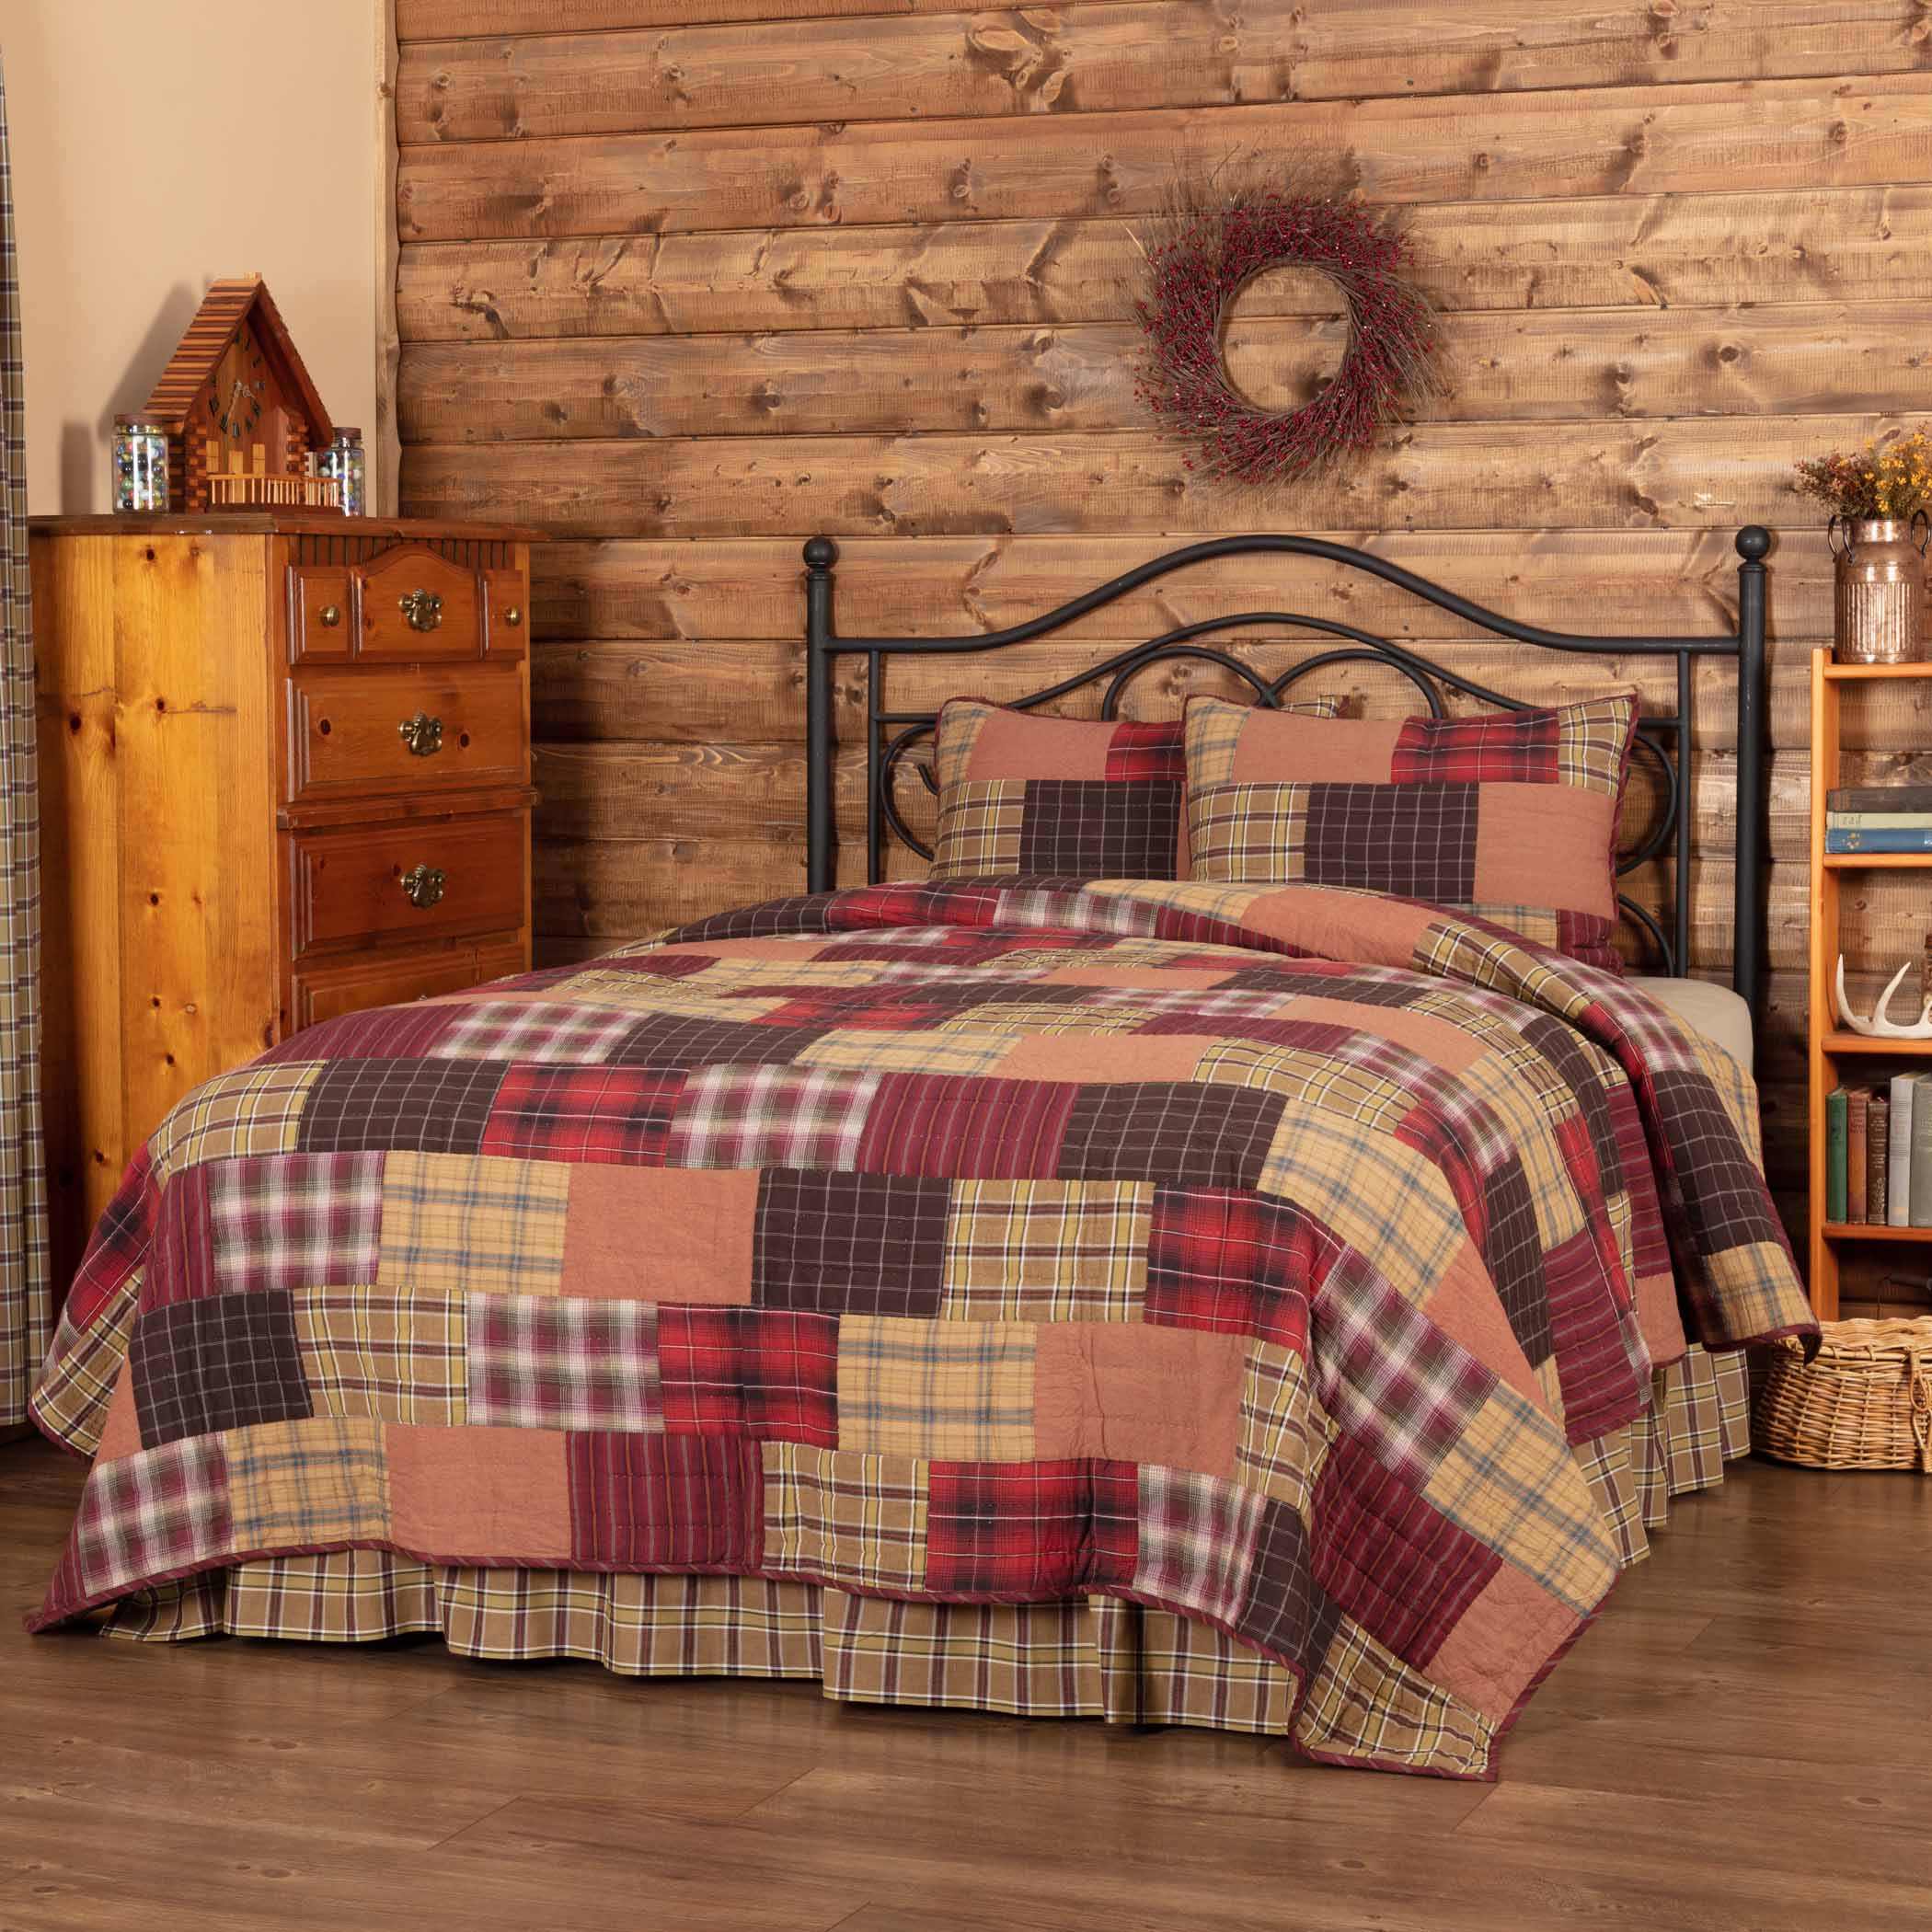 Cider Mill California King Quilt 130Wx115L - Allysons Place